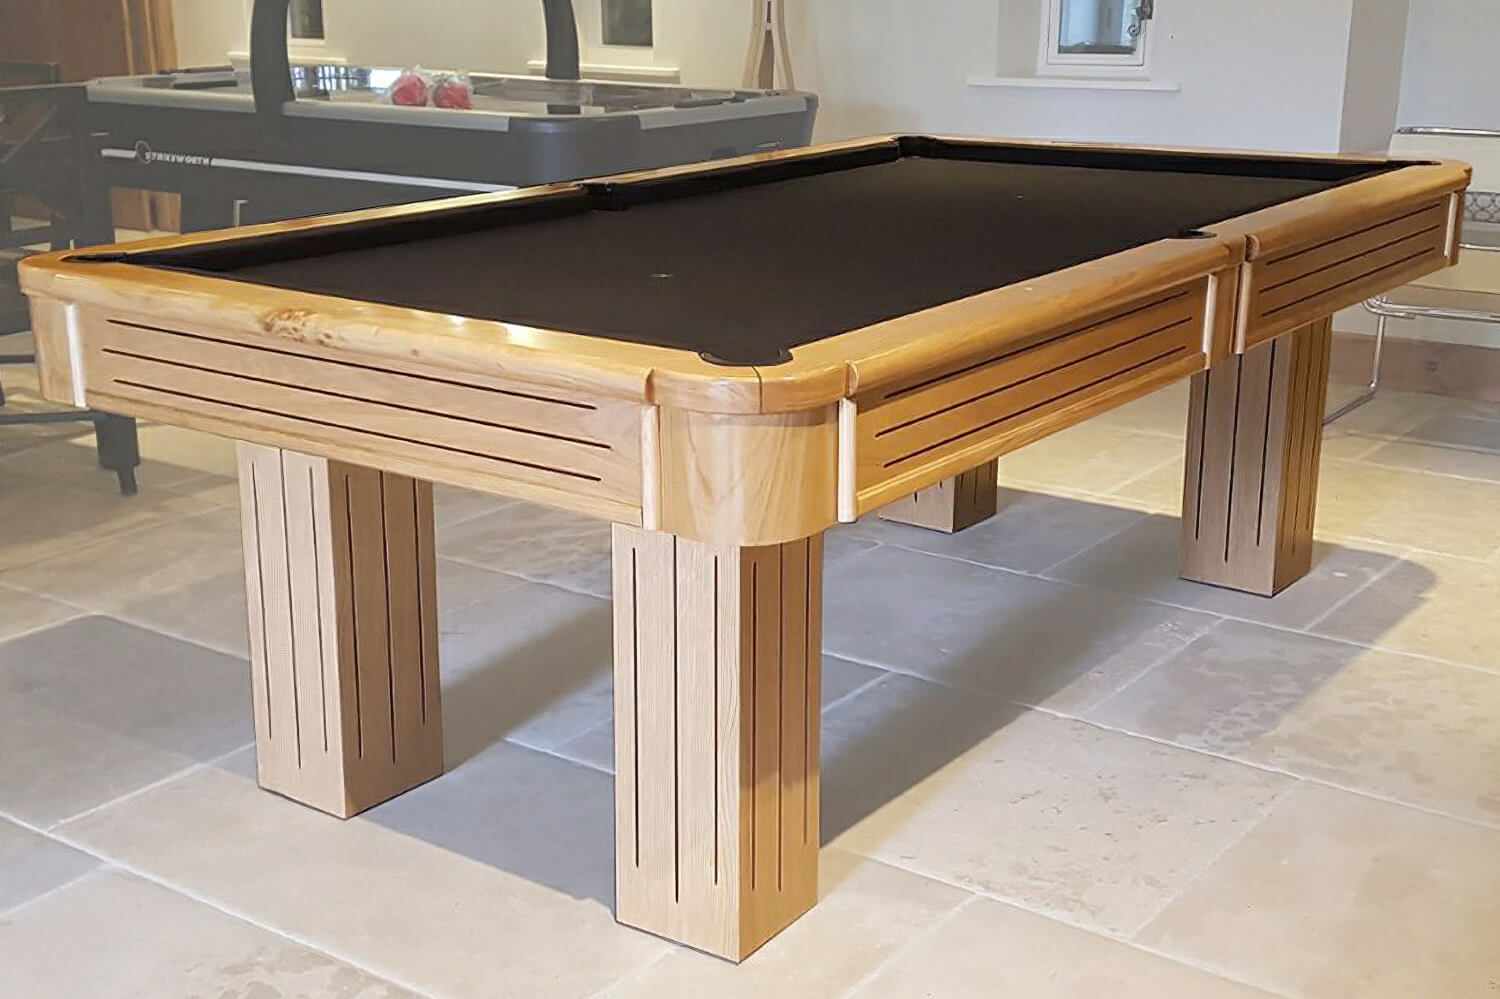 The Rincao Slate Bed Pool Table Liberty Games